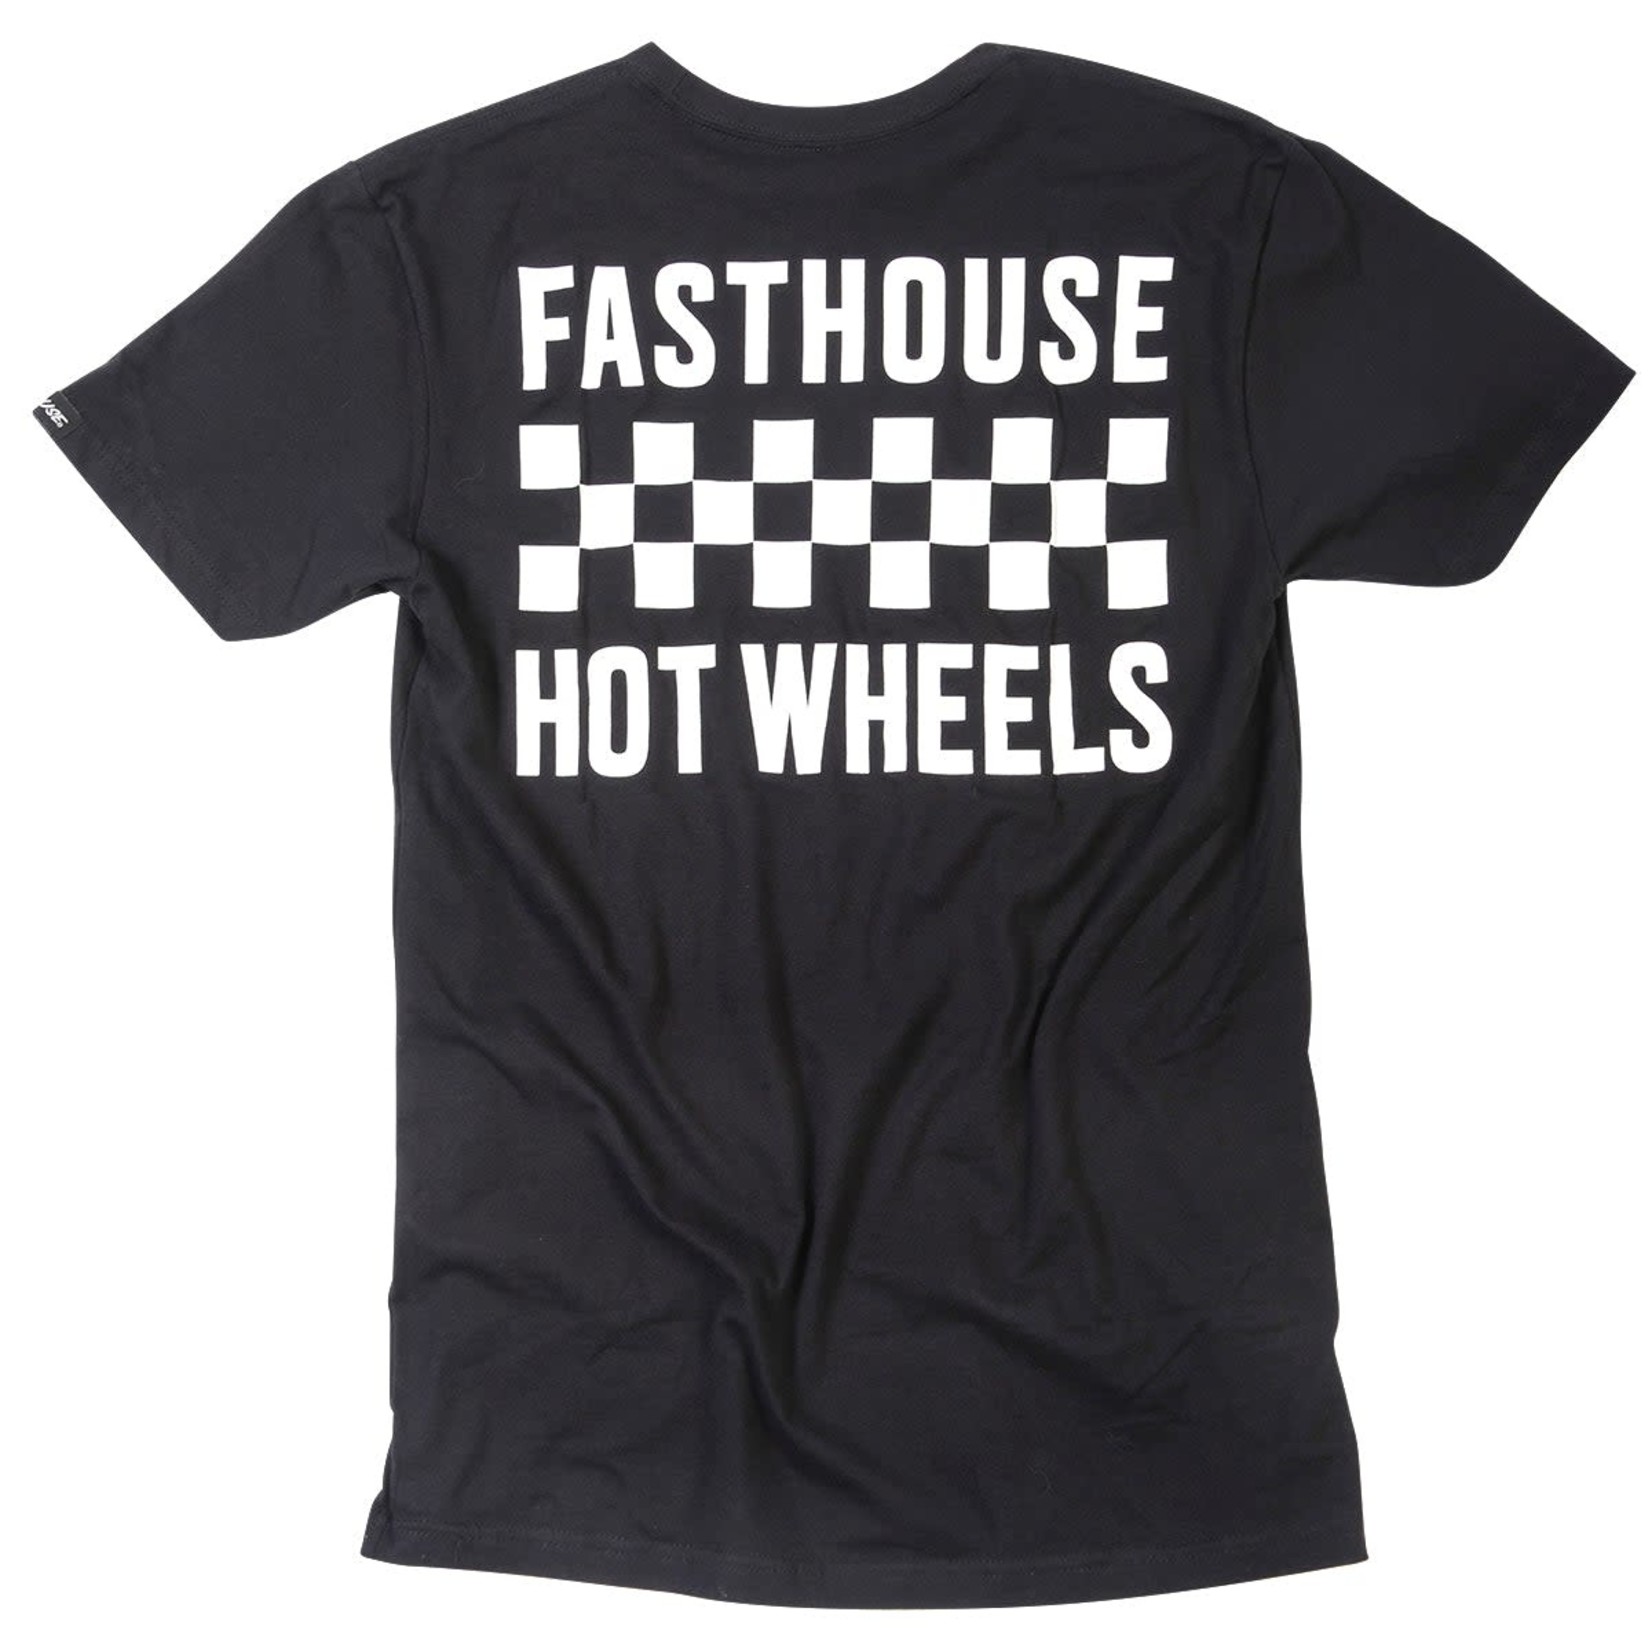 FASTHOUSE Fasthouse Stacked Hot Wheels Tee, Black